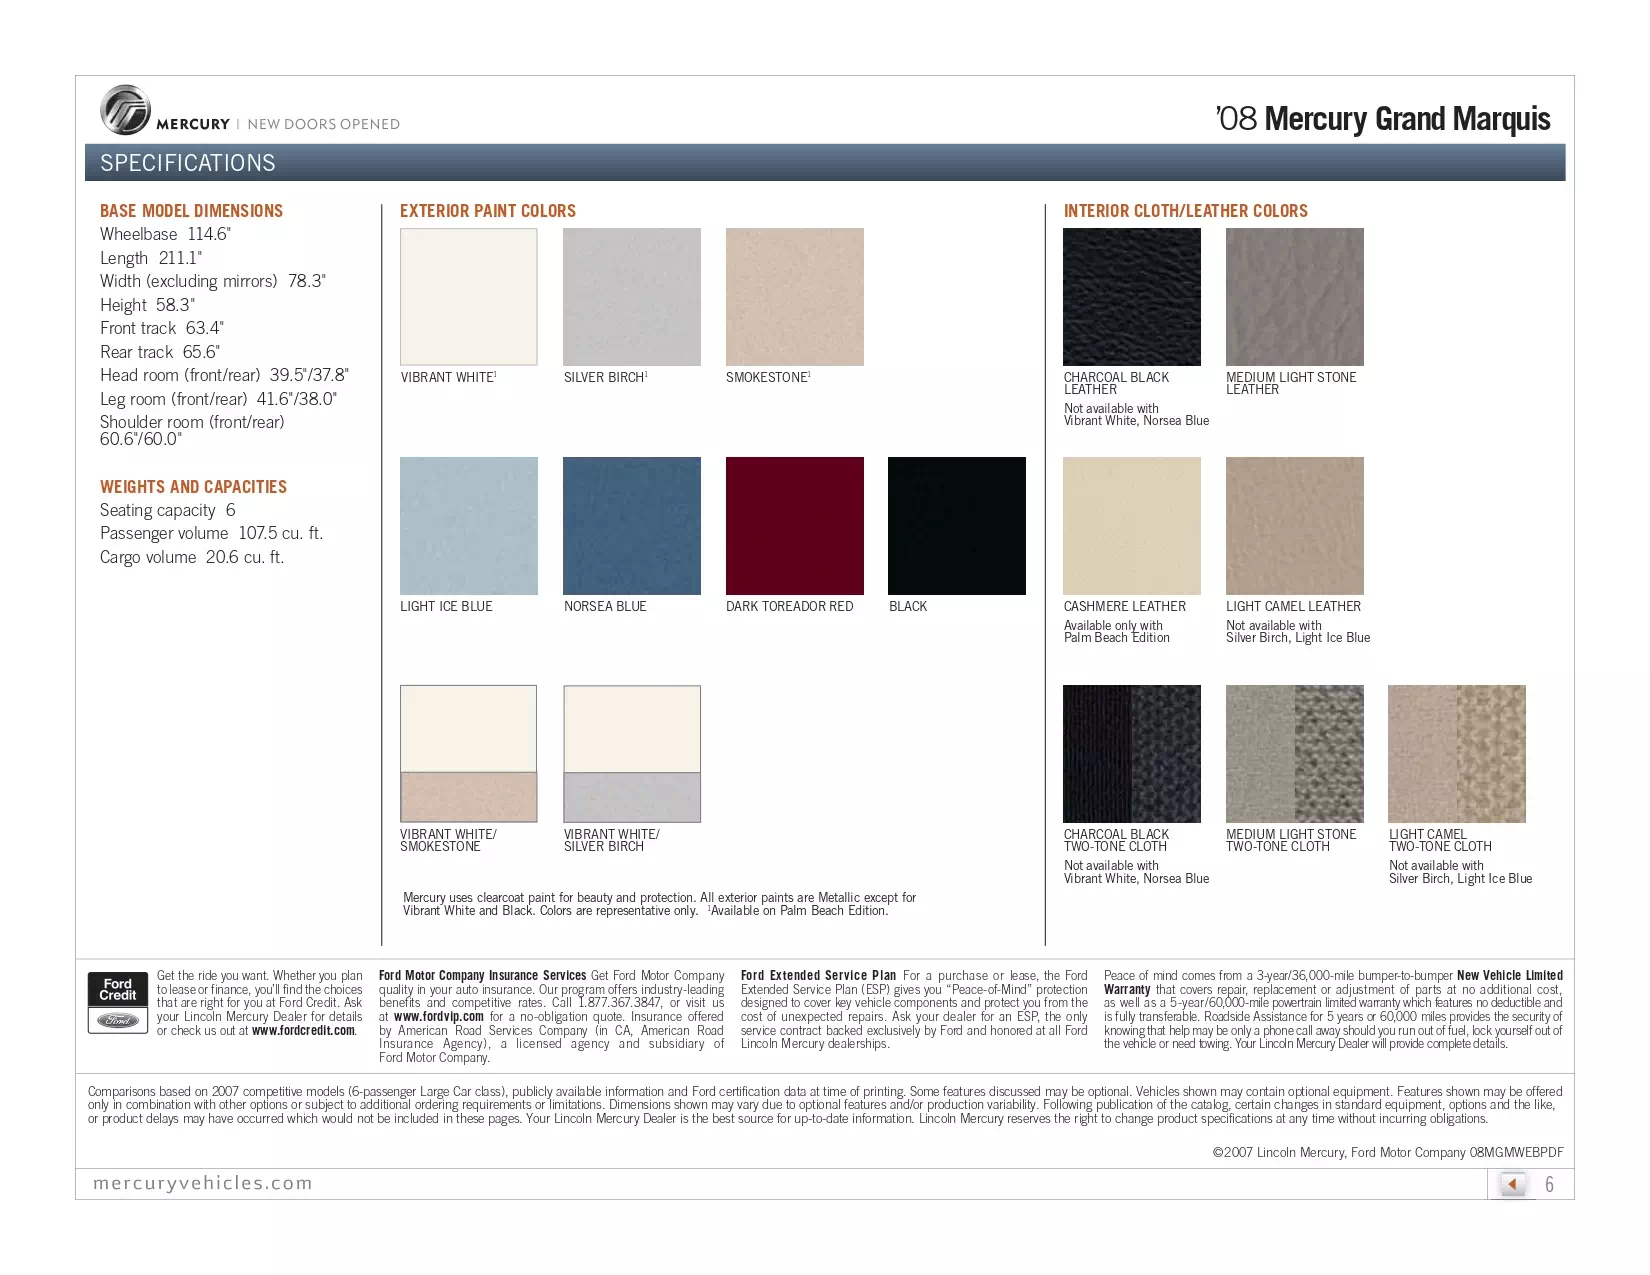 exterior color swatches showing what options were used on the 2008 Mercury Grand Marquis Vehicles